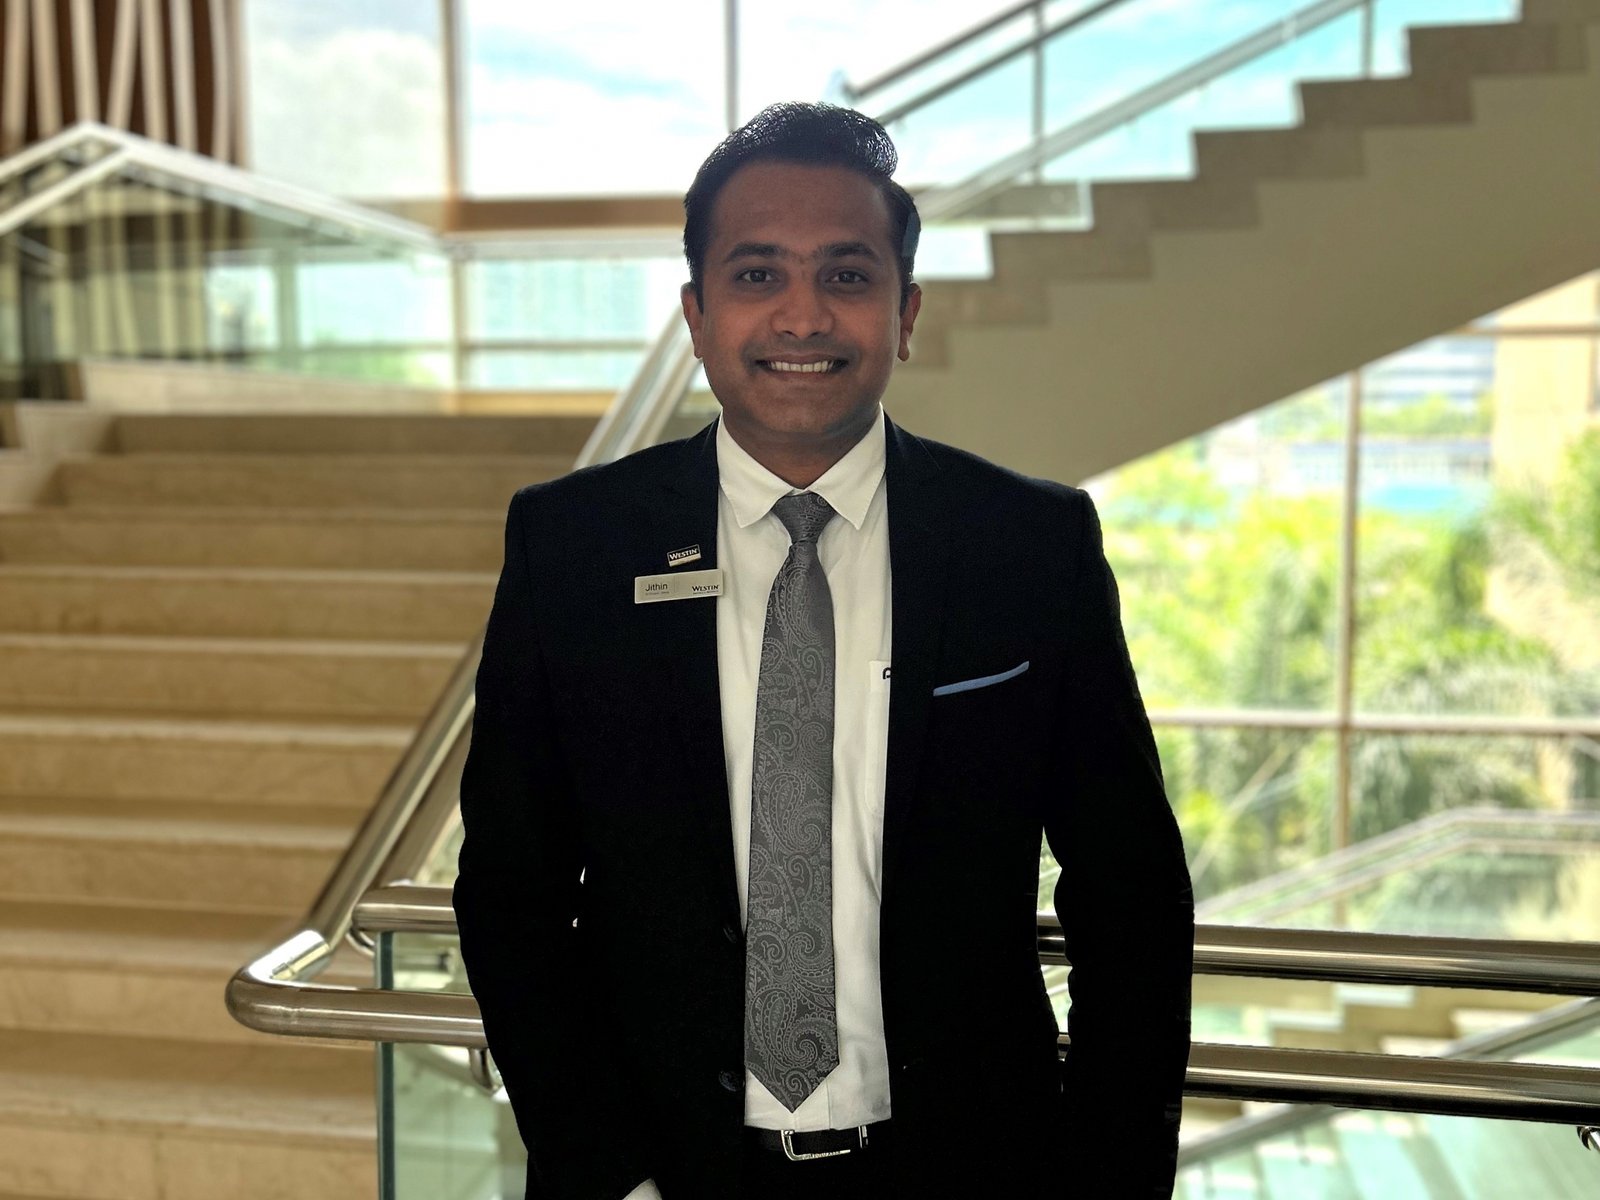 The Westin Chennai Velachery appoints Jithin Nair as Food & Beverage Manager  